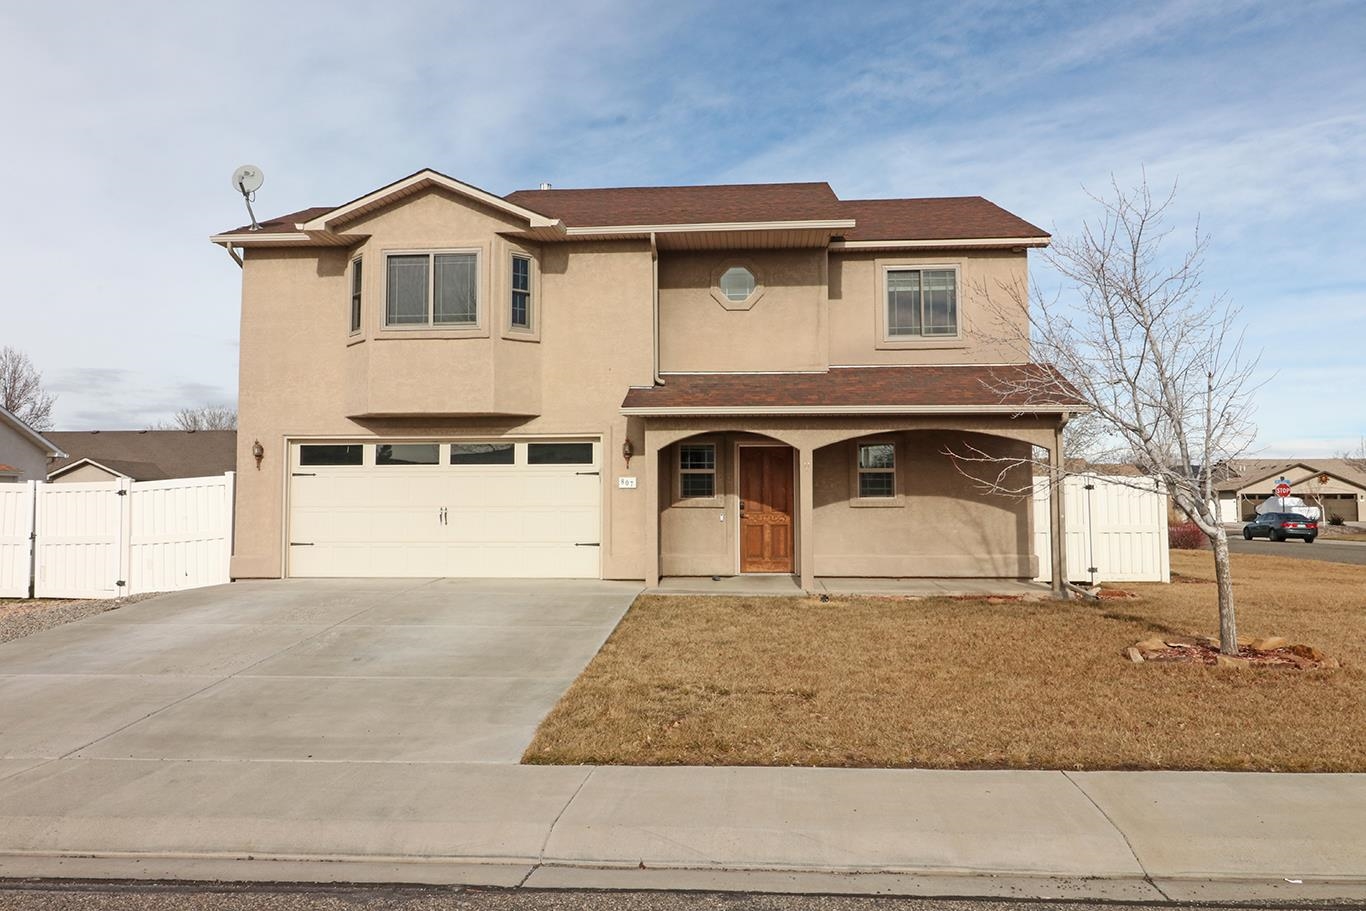 This one has so much to offer & is ready for new owners!!! This wonderful Fruita home features 4 beds + family room/office, 3 baths, & 2 car garage w/ 2000 sq ft of living space. Main floor features an open concept living, kitchen & dining area w/ laundry room & 1/2 bath. Upstairs you will find a spacious master suite w/ 5-pc master bath & walk in closet. There are also 3 additional bedrooms, full bath & great family room, office, flex room....the possibilities are endless. All appliances, washer & dryer are included which makes this one MOVE IN READY!!  Corner lot, RV parking, garden area, nice yard & more!!! Come take a closer look at this one & make it your NEW HOME!!